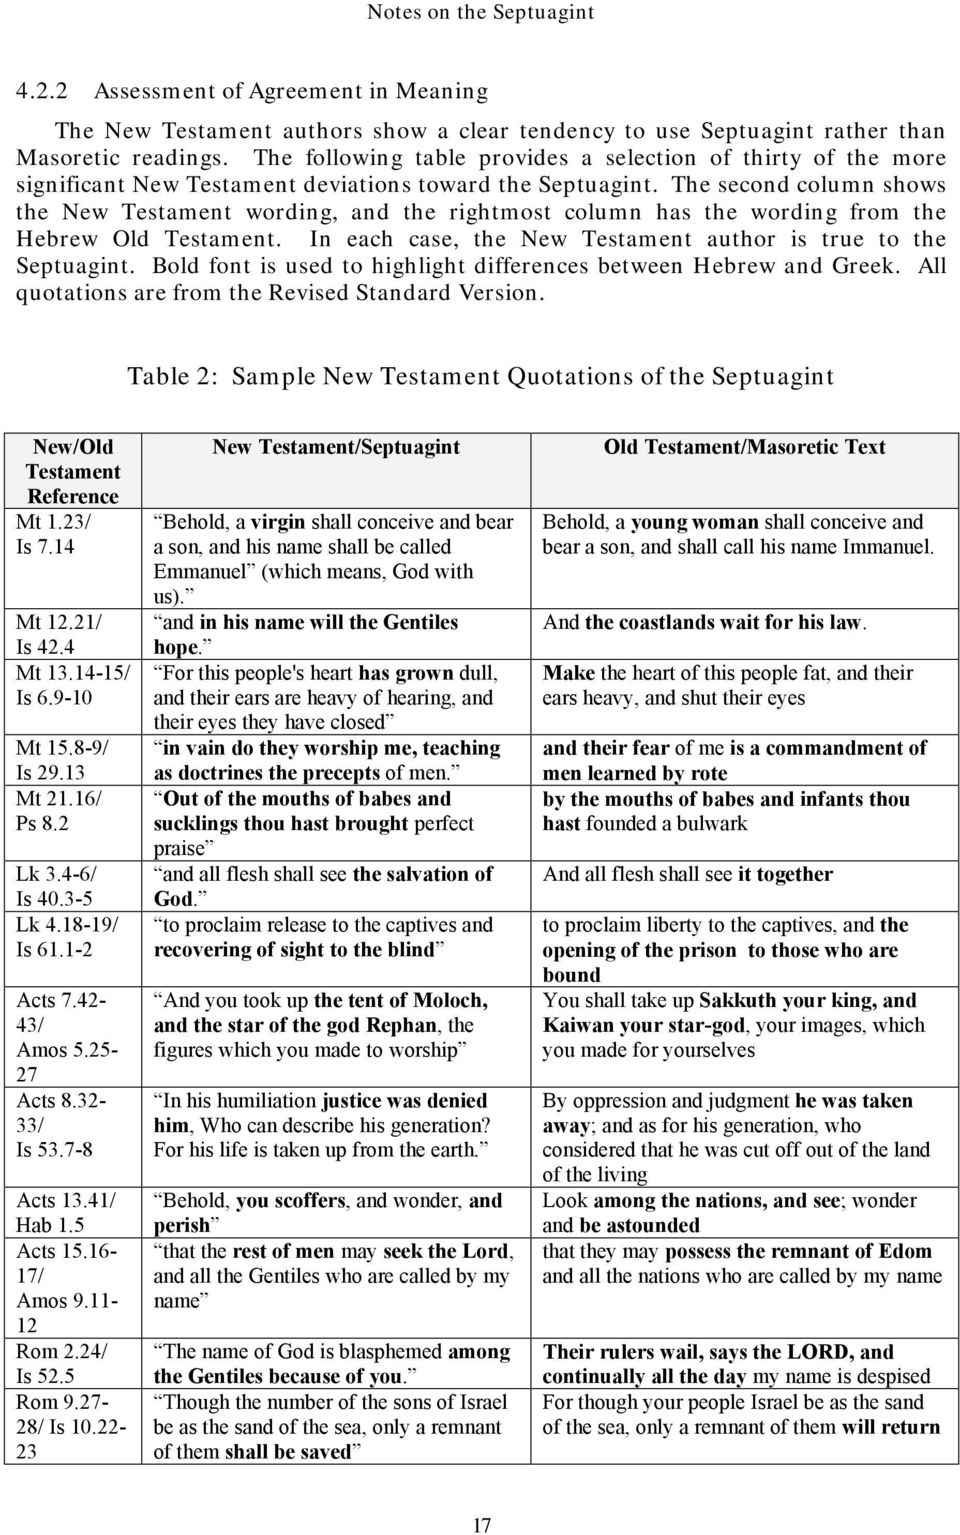 The second column shows the New Testament wording, and the rightmost column has the wording from the Hebrew Old Testament. In each case, the New Testament author is true to the Septuagint.